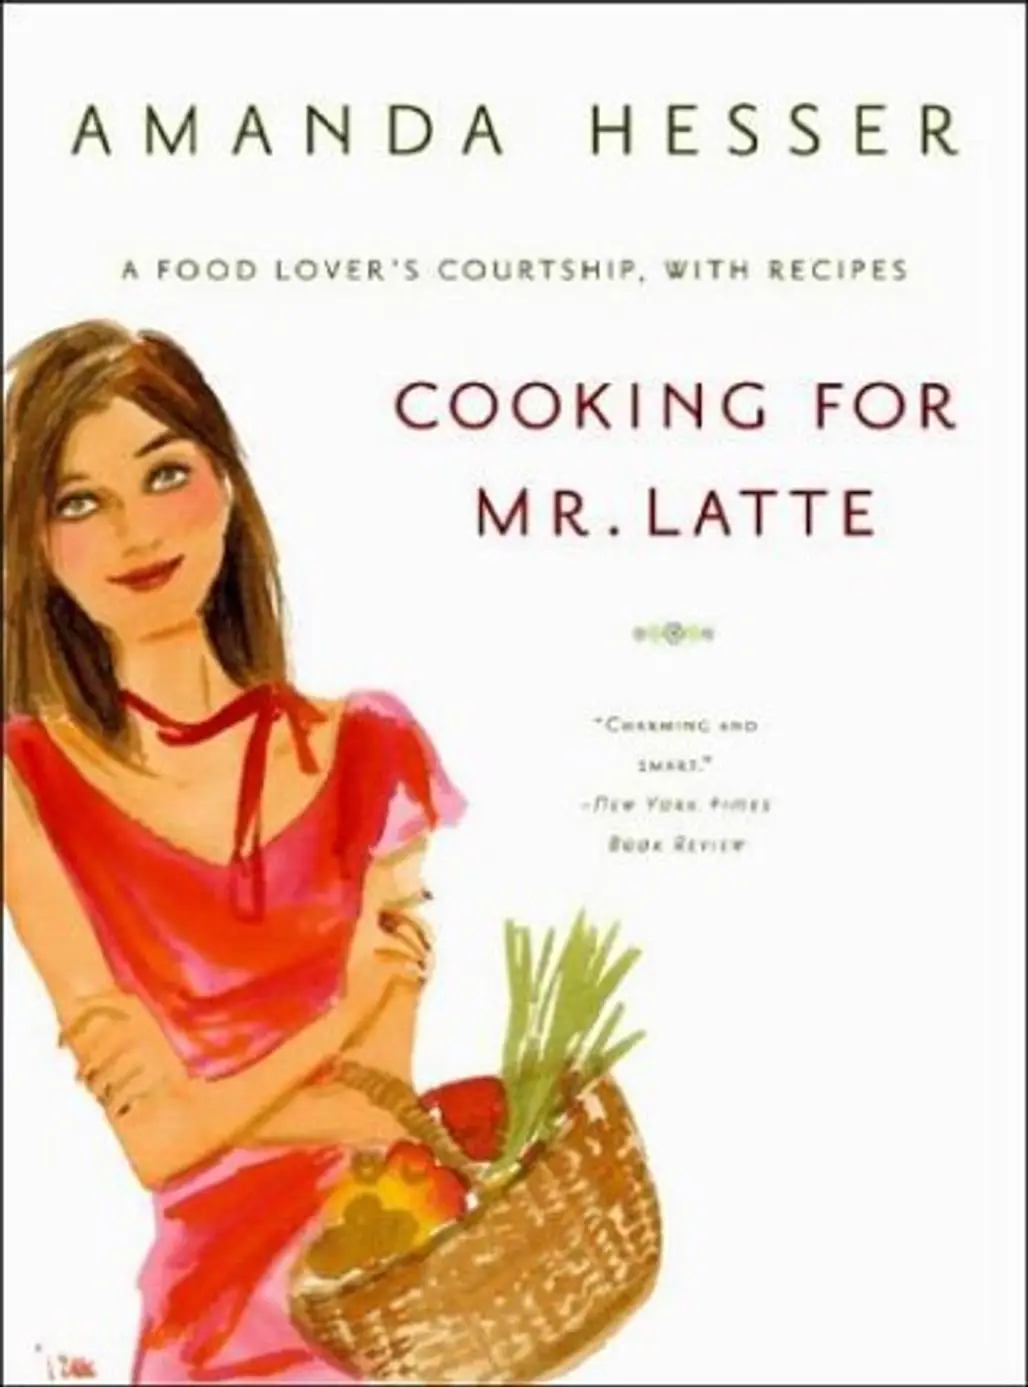 Cooking for Mr. Latte by Amanda Hesser